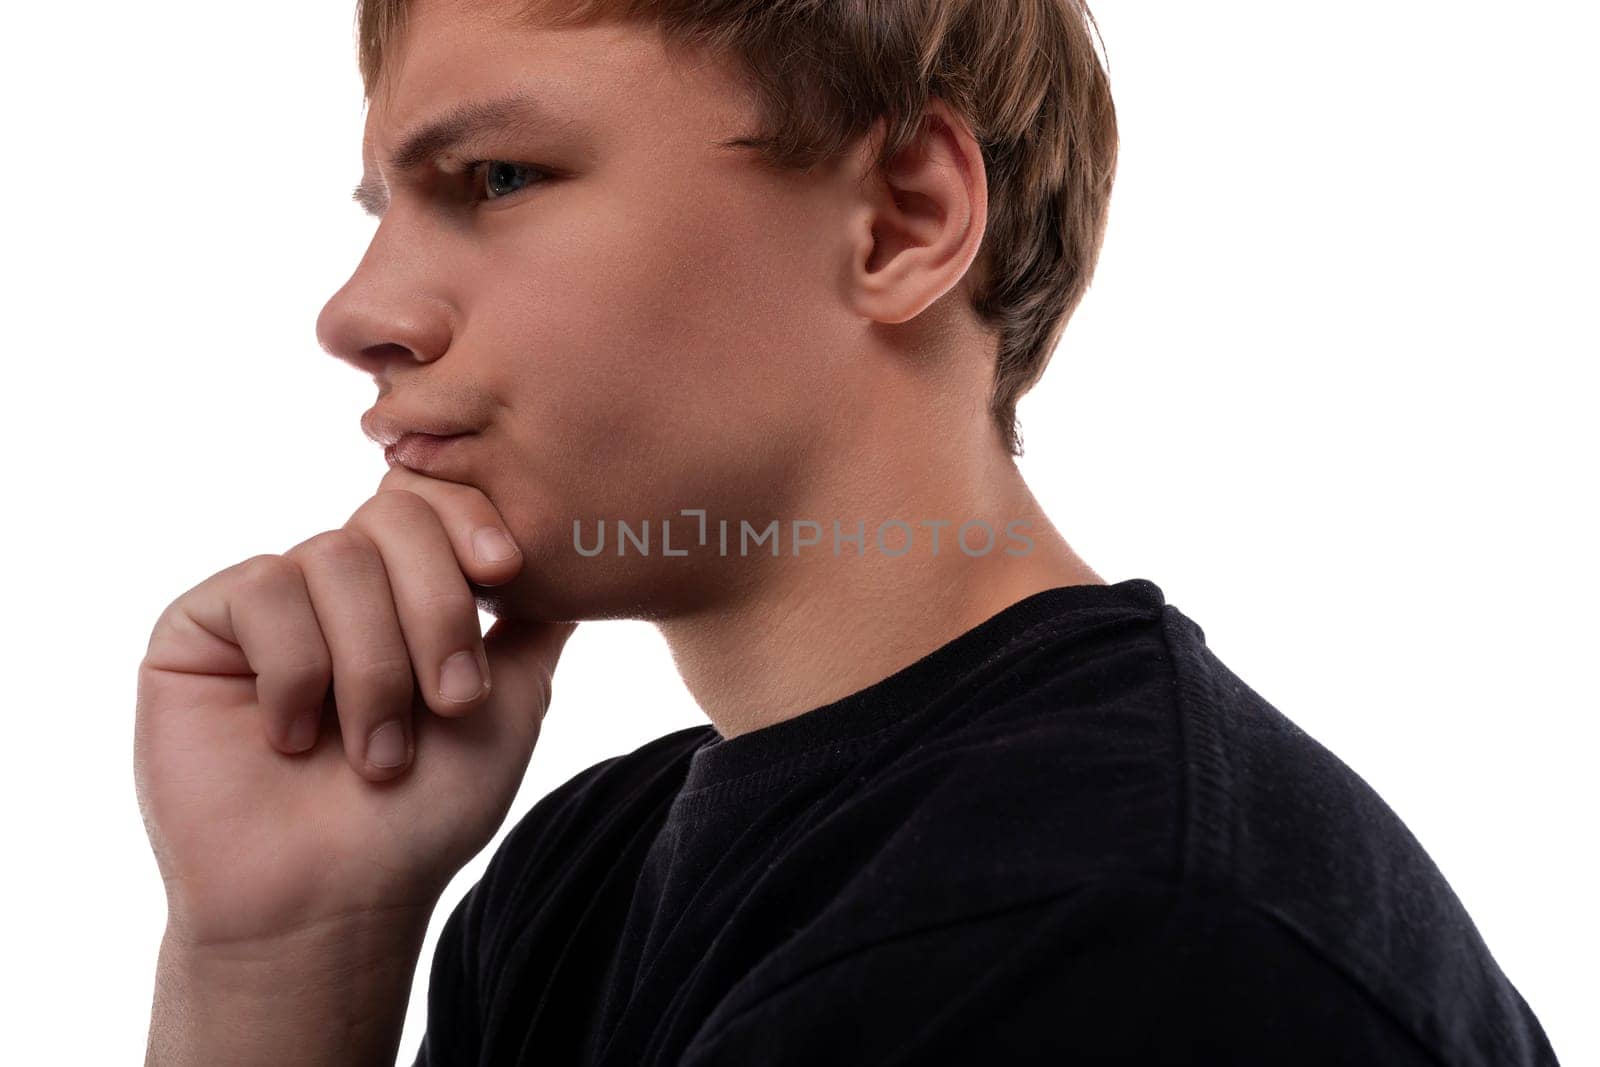 Close-up portrait of a pensive teenage guy with brown hair.